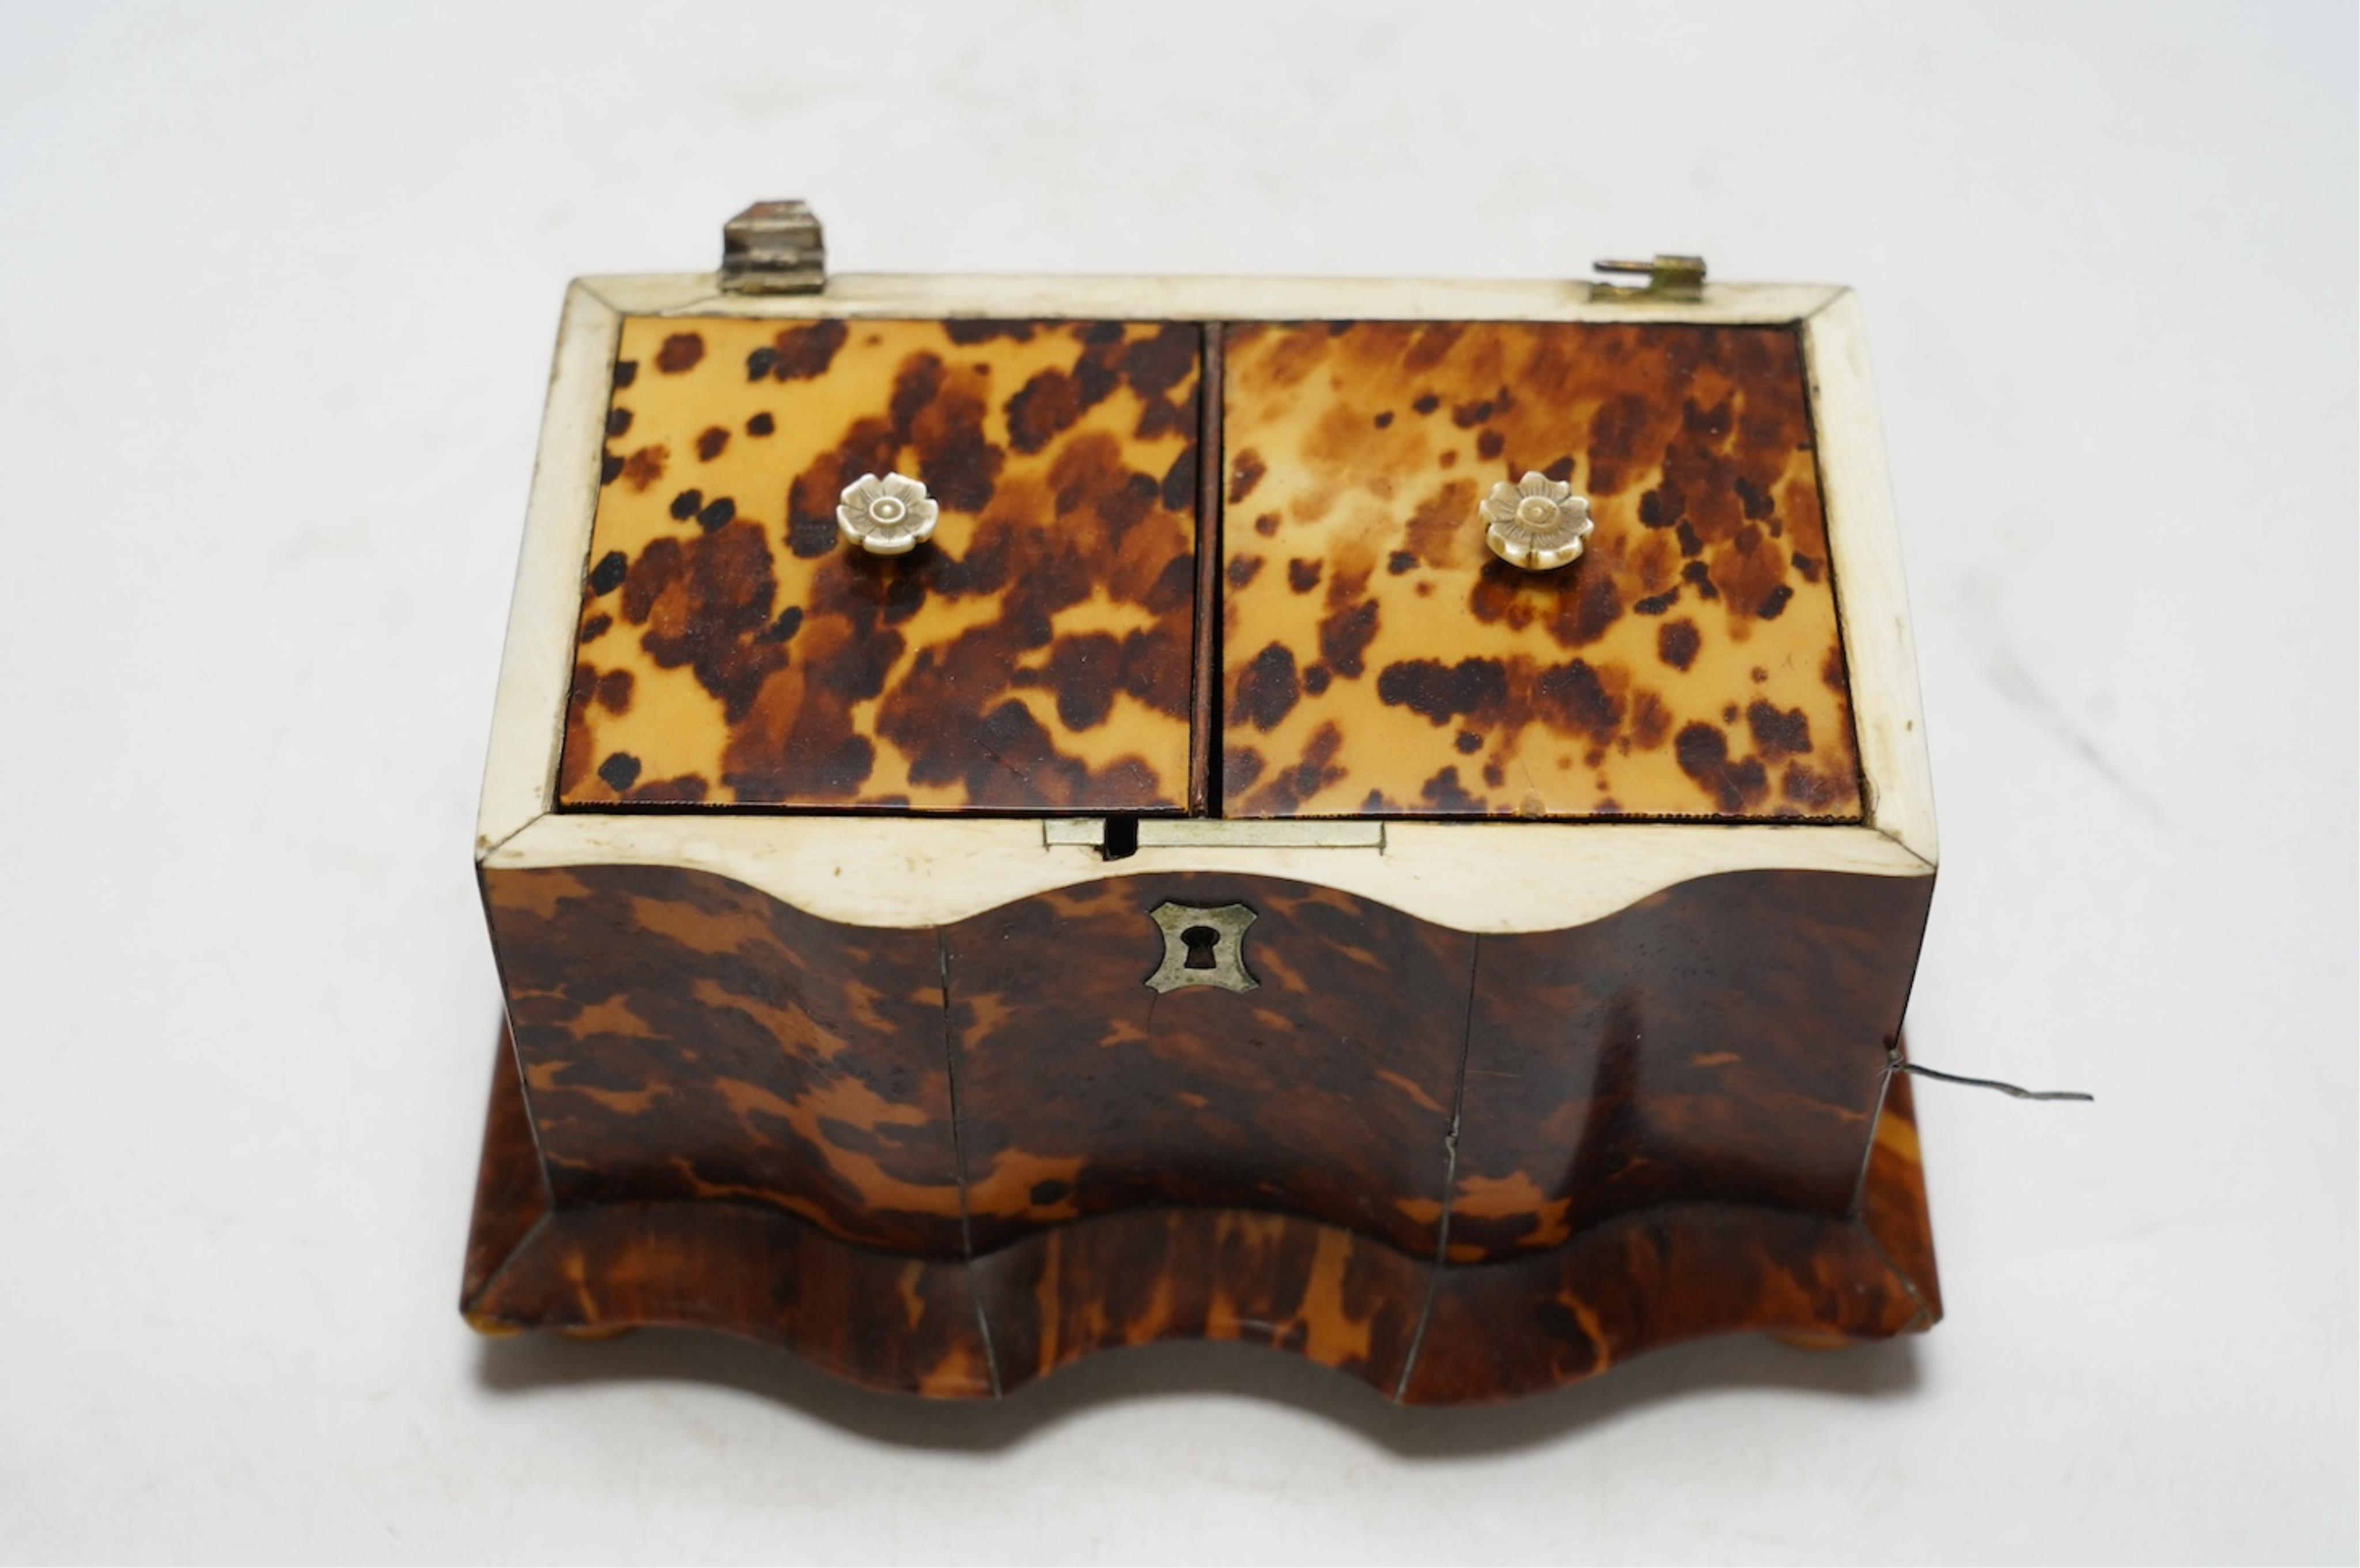 A Regency tortoiseshell tea caddy with inlaid silver and ivory stringing, on later bun feet, 12cm high. CITES Submission reference 64HKMP8J. Condition - poor to fair, lid detached, some repairs needed to stringing